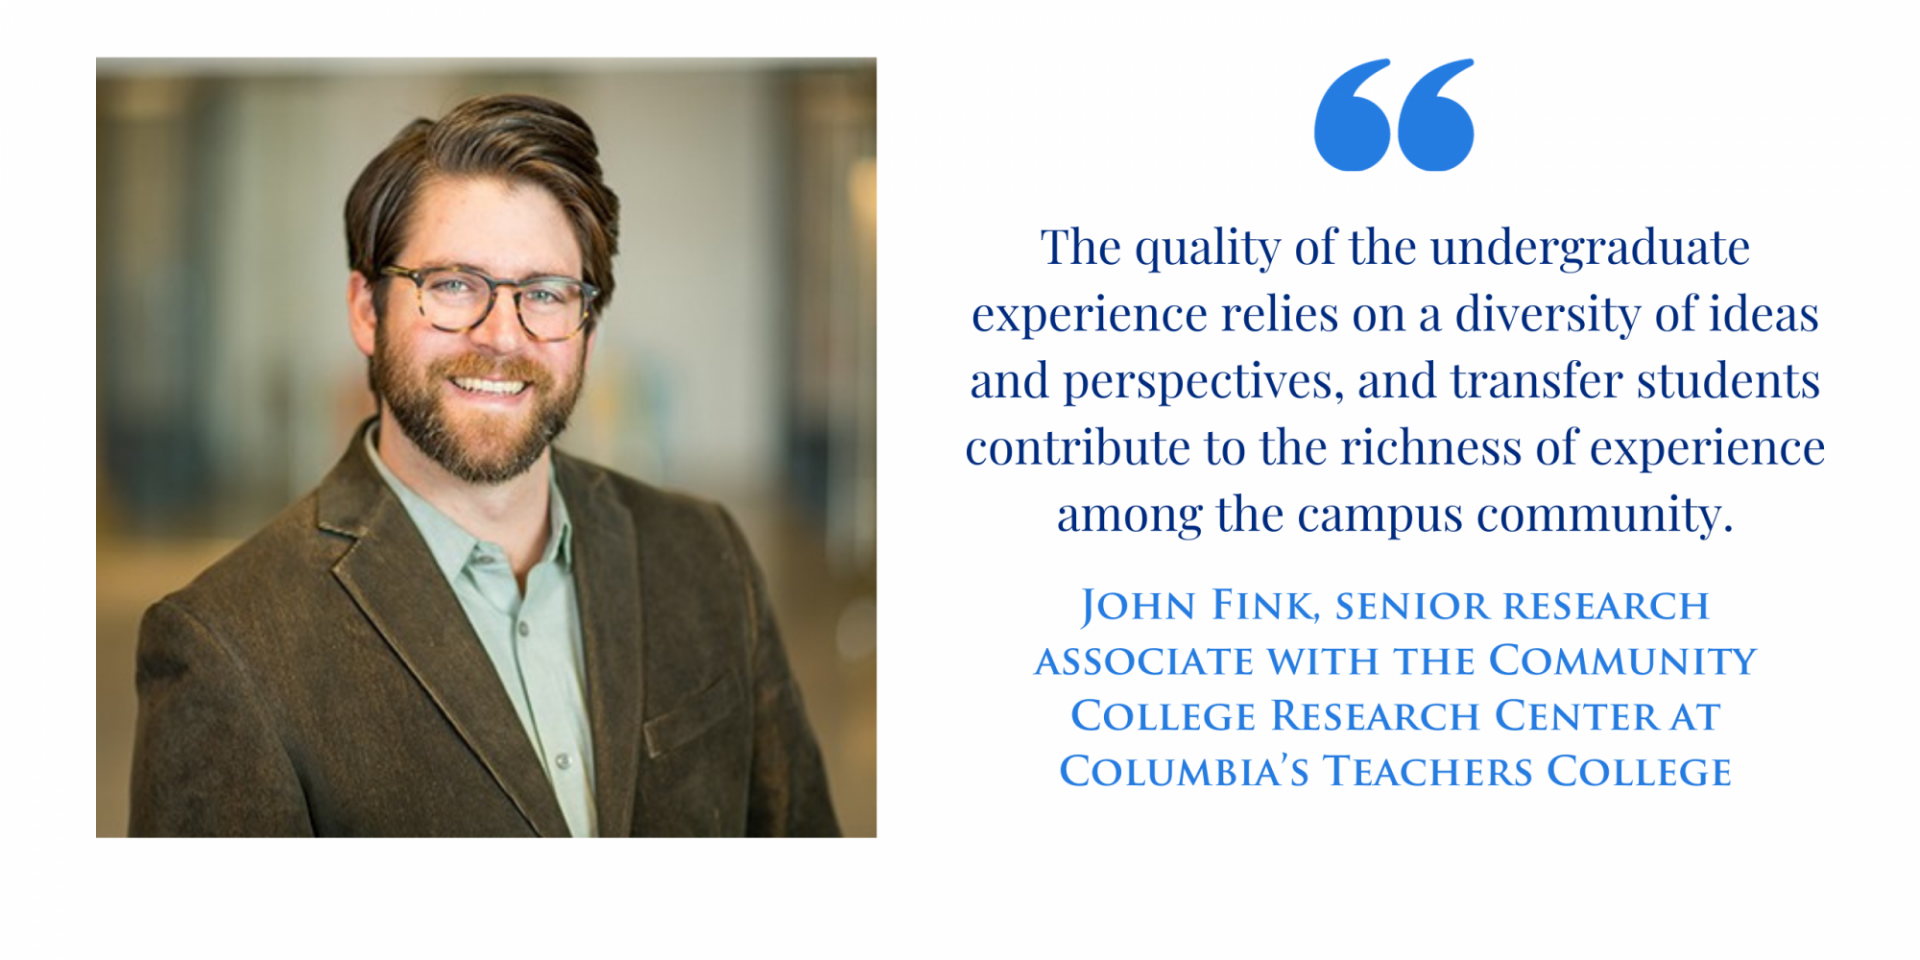 "The quality of the undergraduate experience relies on a diversity of ideas and perspectives, and transfer students contribute to the richness of experience among the campus community." John Fink, senior research associate with the Community College Research Center at Columbia’s Teachers College